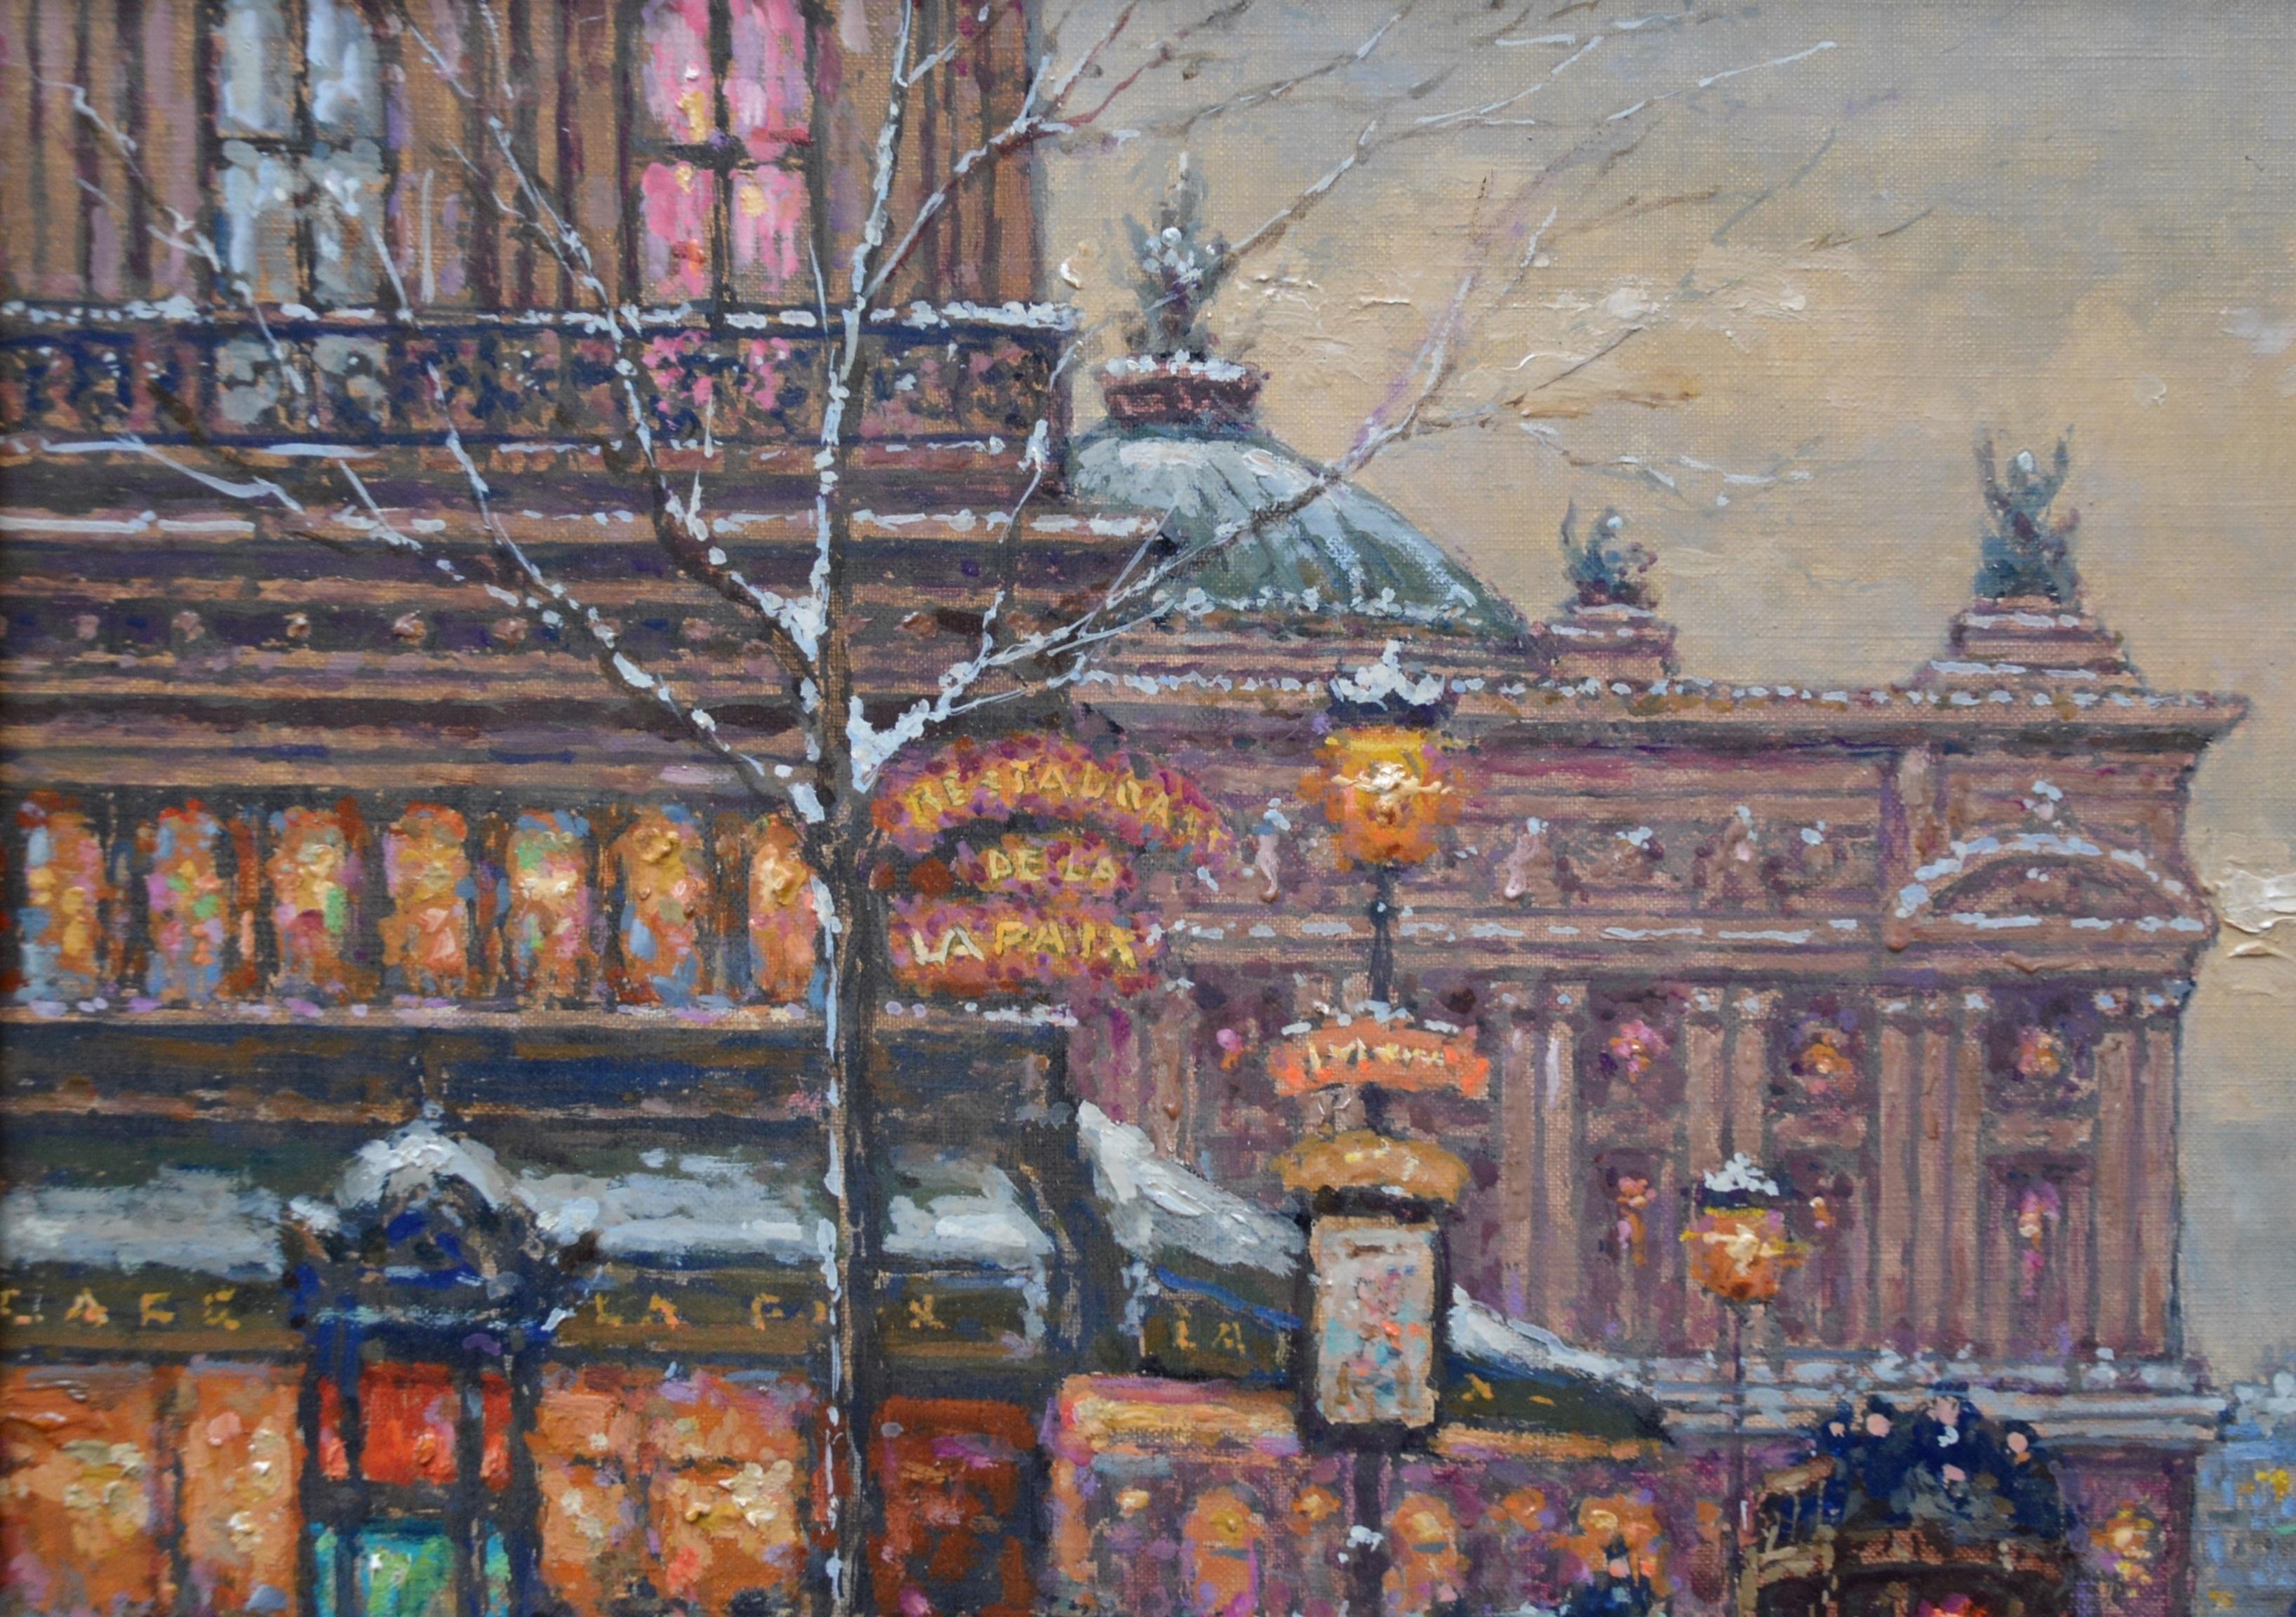 'L'Opera sur la Neige’ by Andre Boyer (1909-1981). 

The painting – which depicts a snow-covered winter scene of the Palais Garnier at l’Opera from the corner of the Boulevard des Capucines – is signed by the artist and presented in a newly